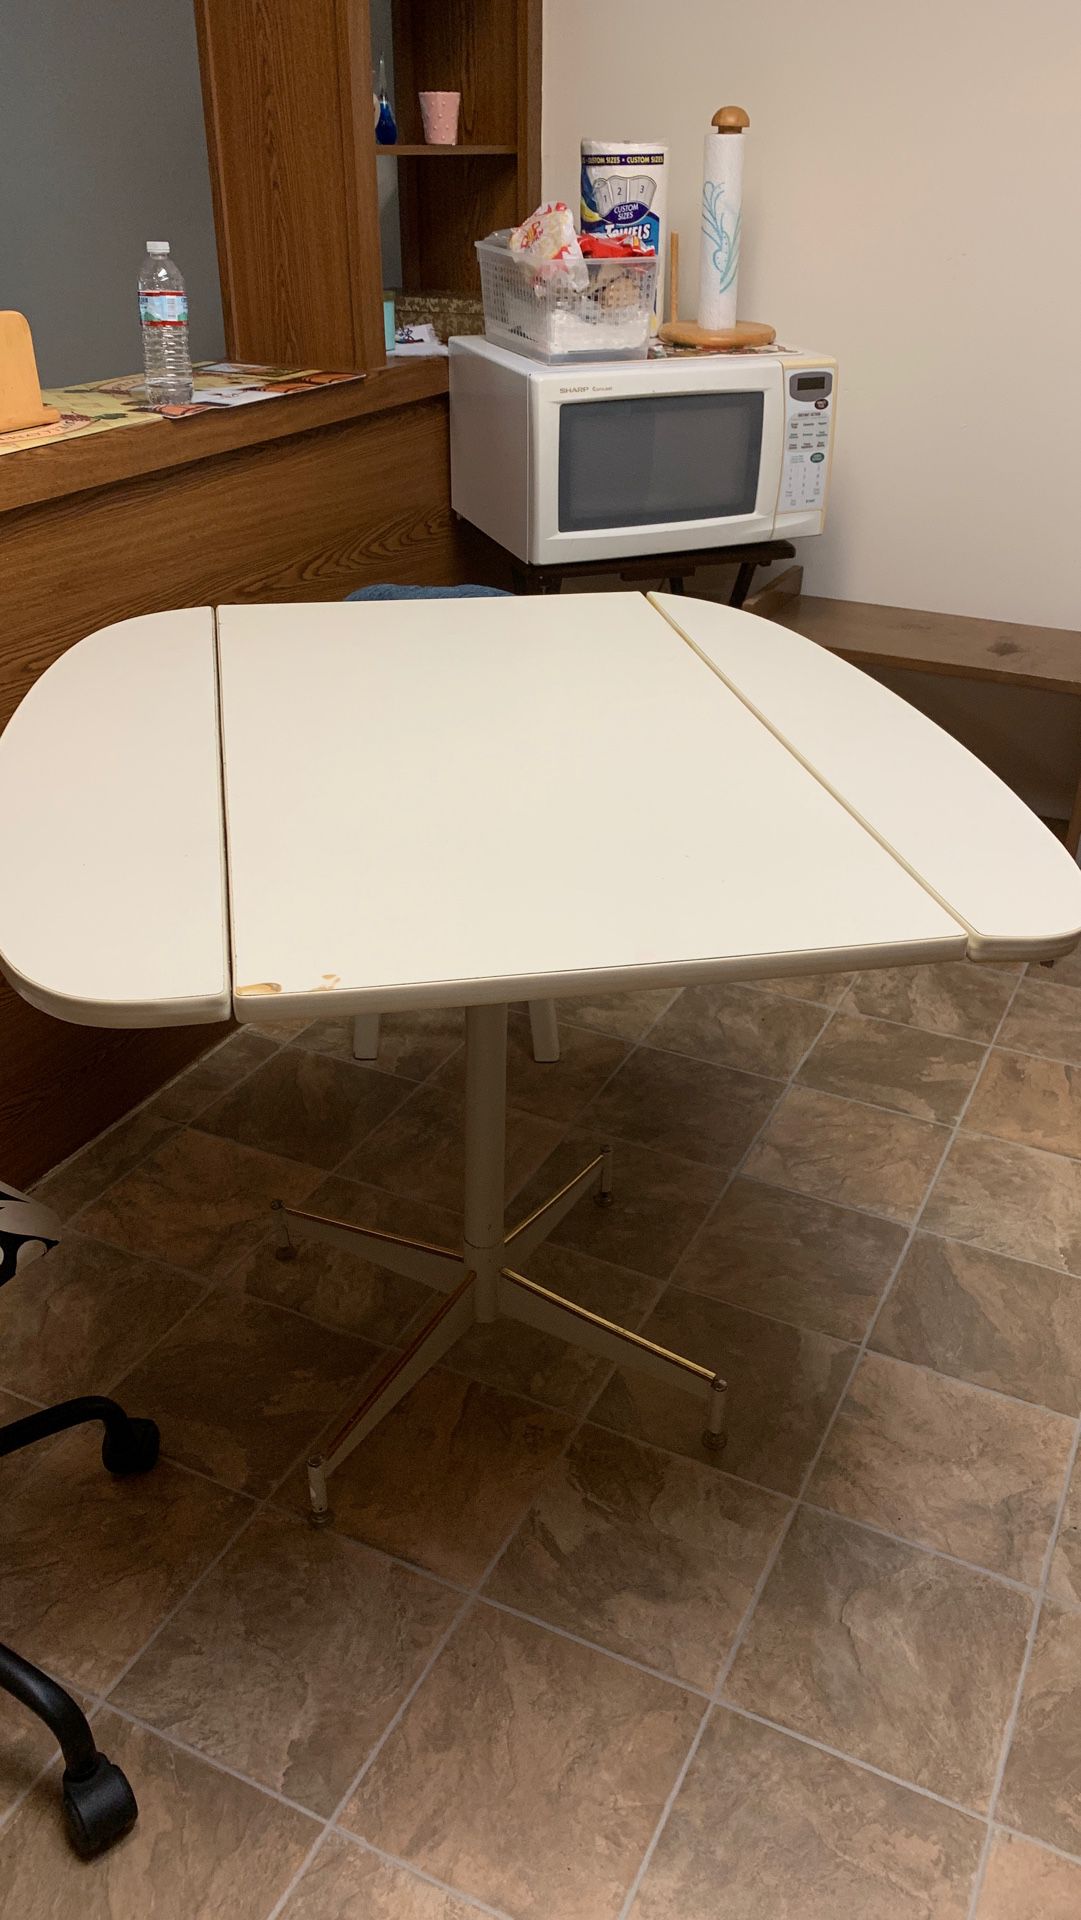 Folderable kitchen table for 4 or 2